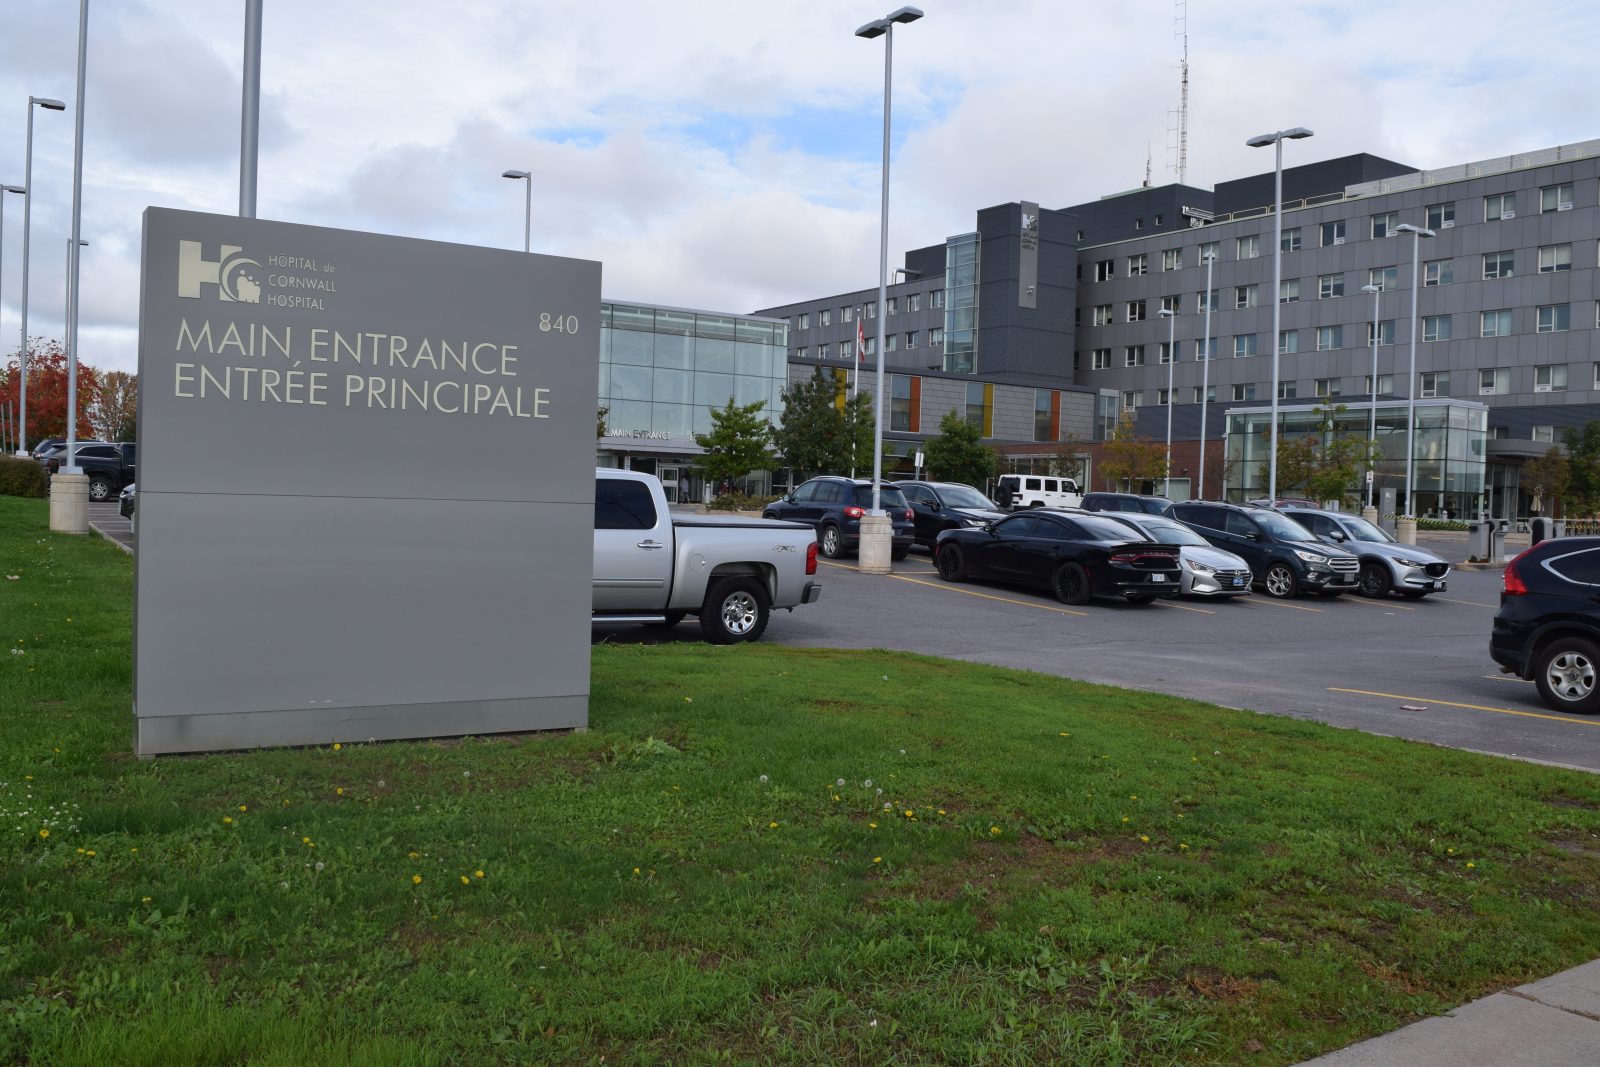 Local hospitals receive nearly $5 million in provincial support